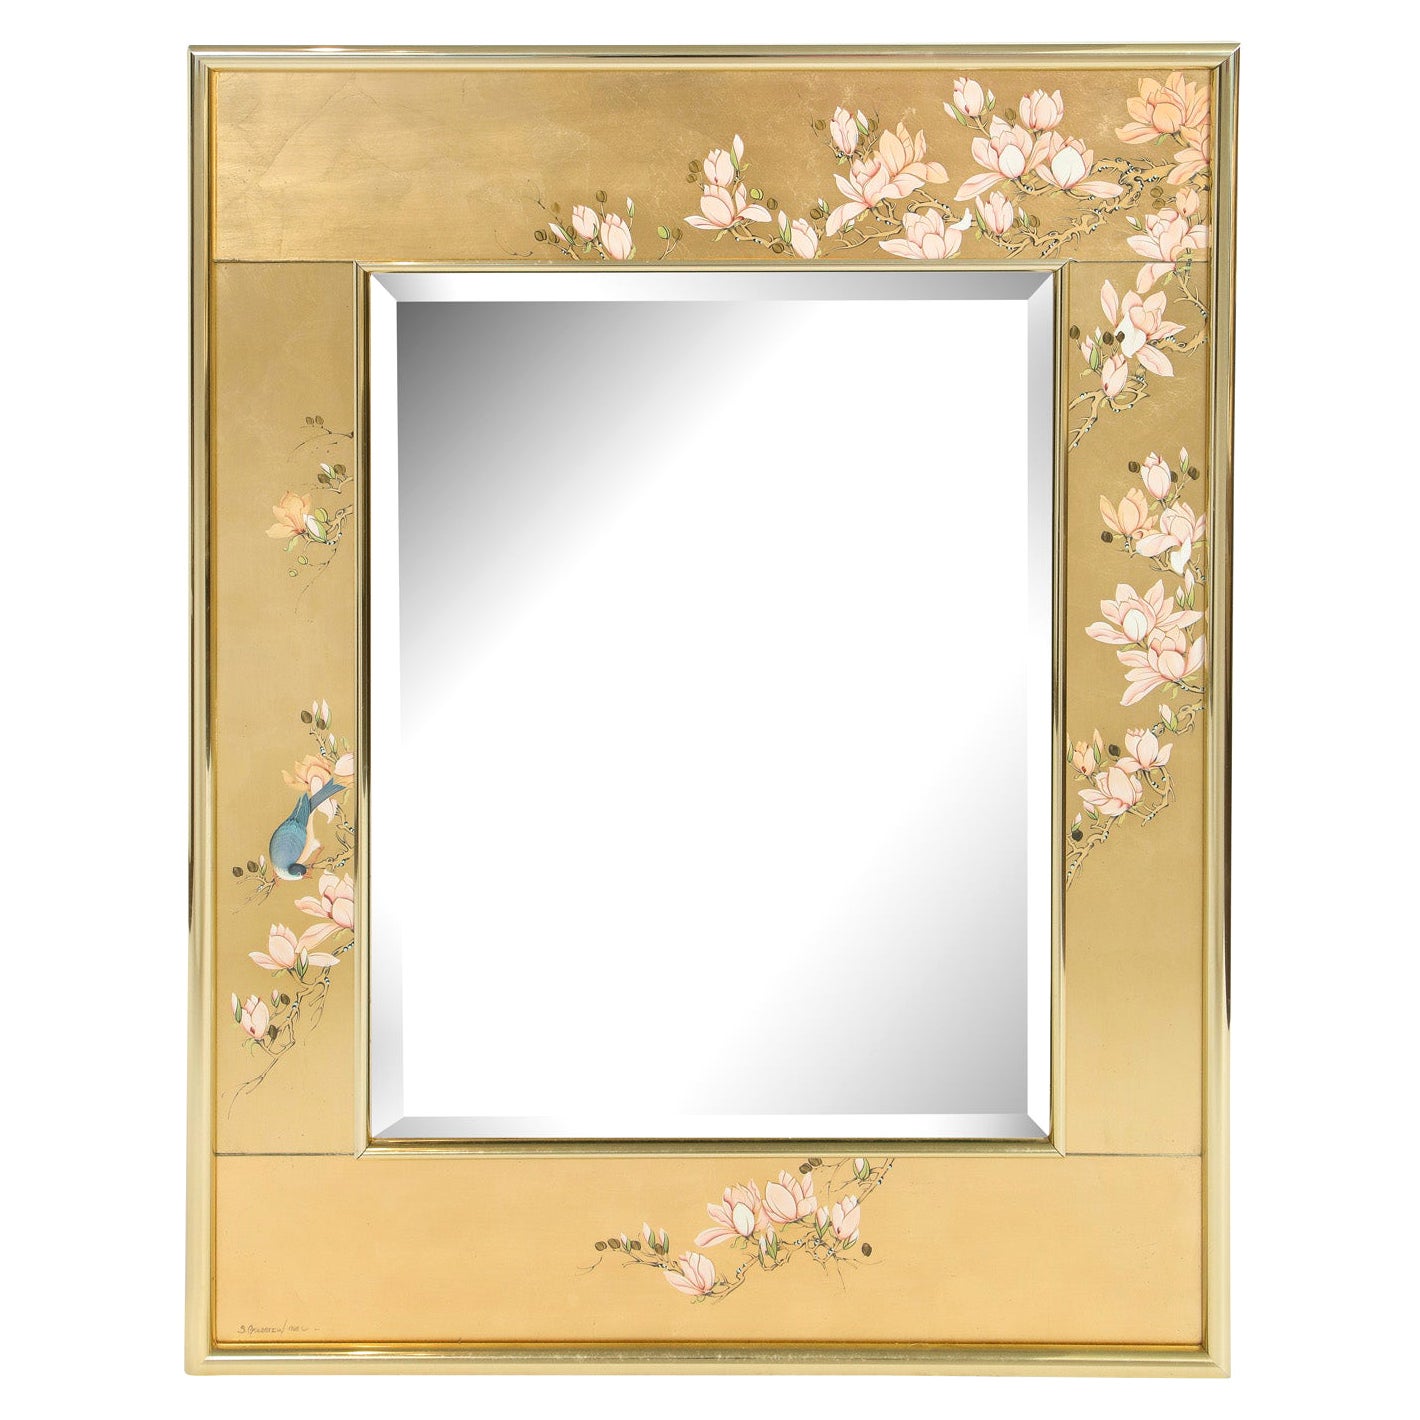 Artisan Reverse Painted Mirror in Gold Leaf with Magnolia Branches 1988 'Signed'